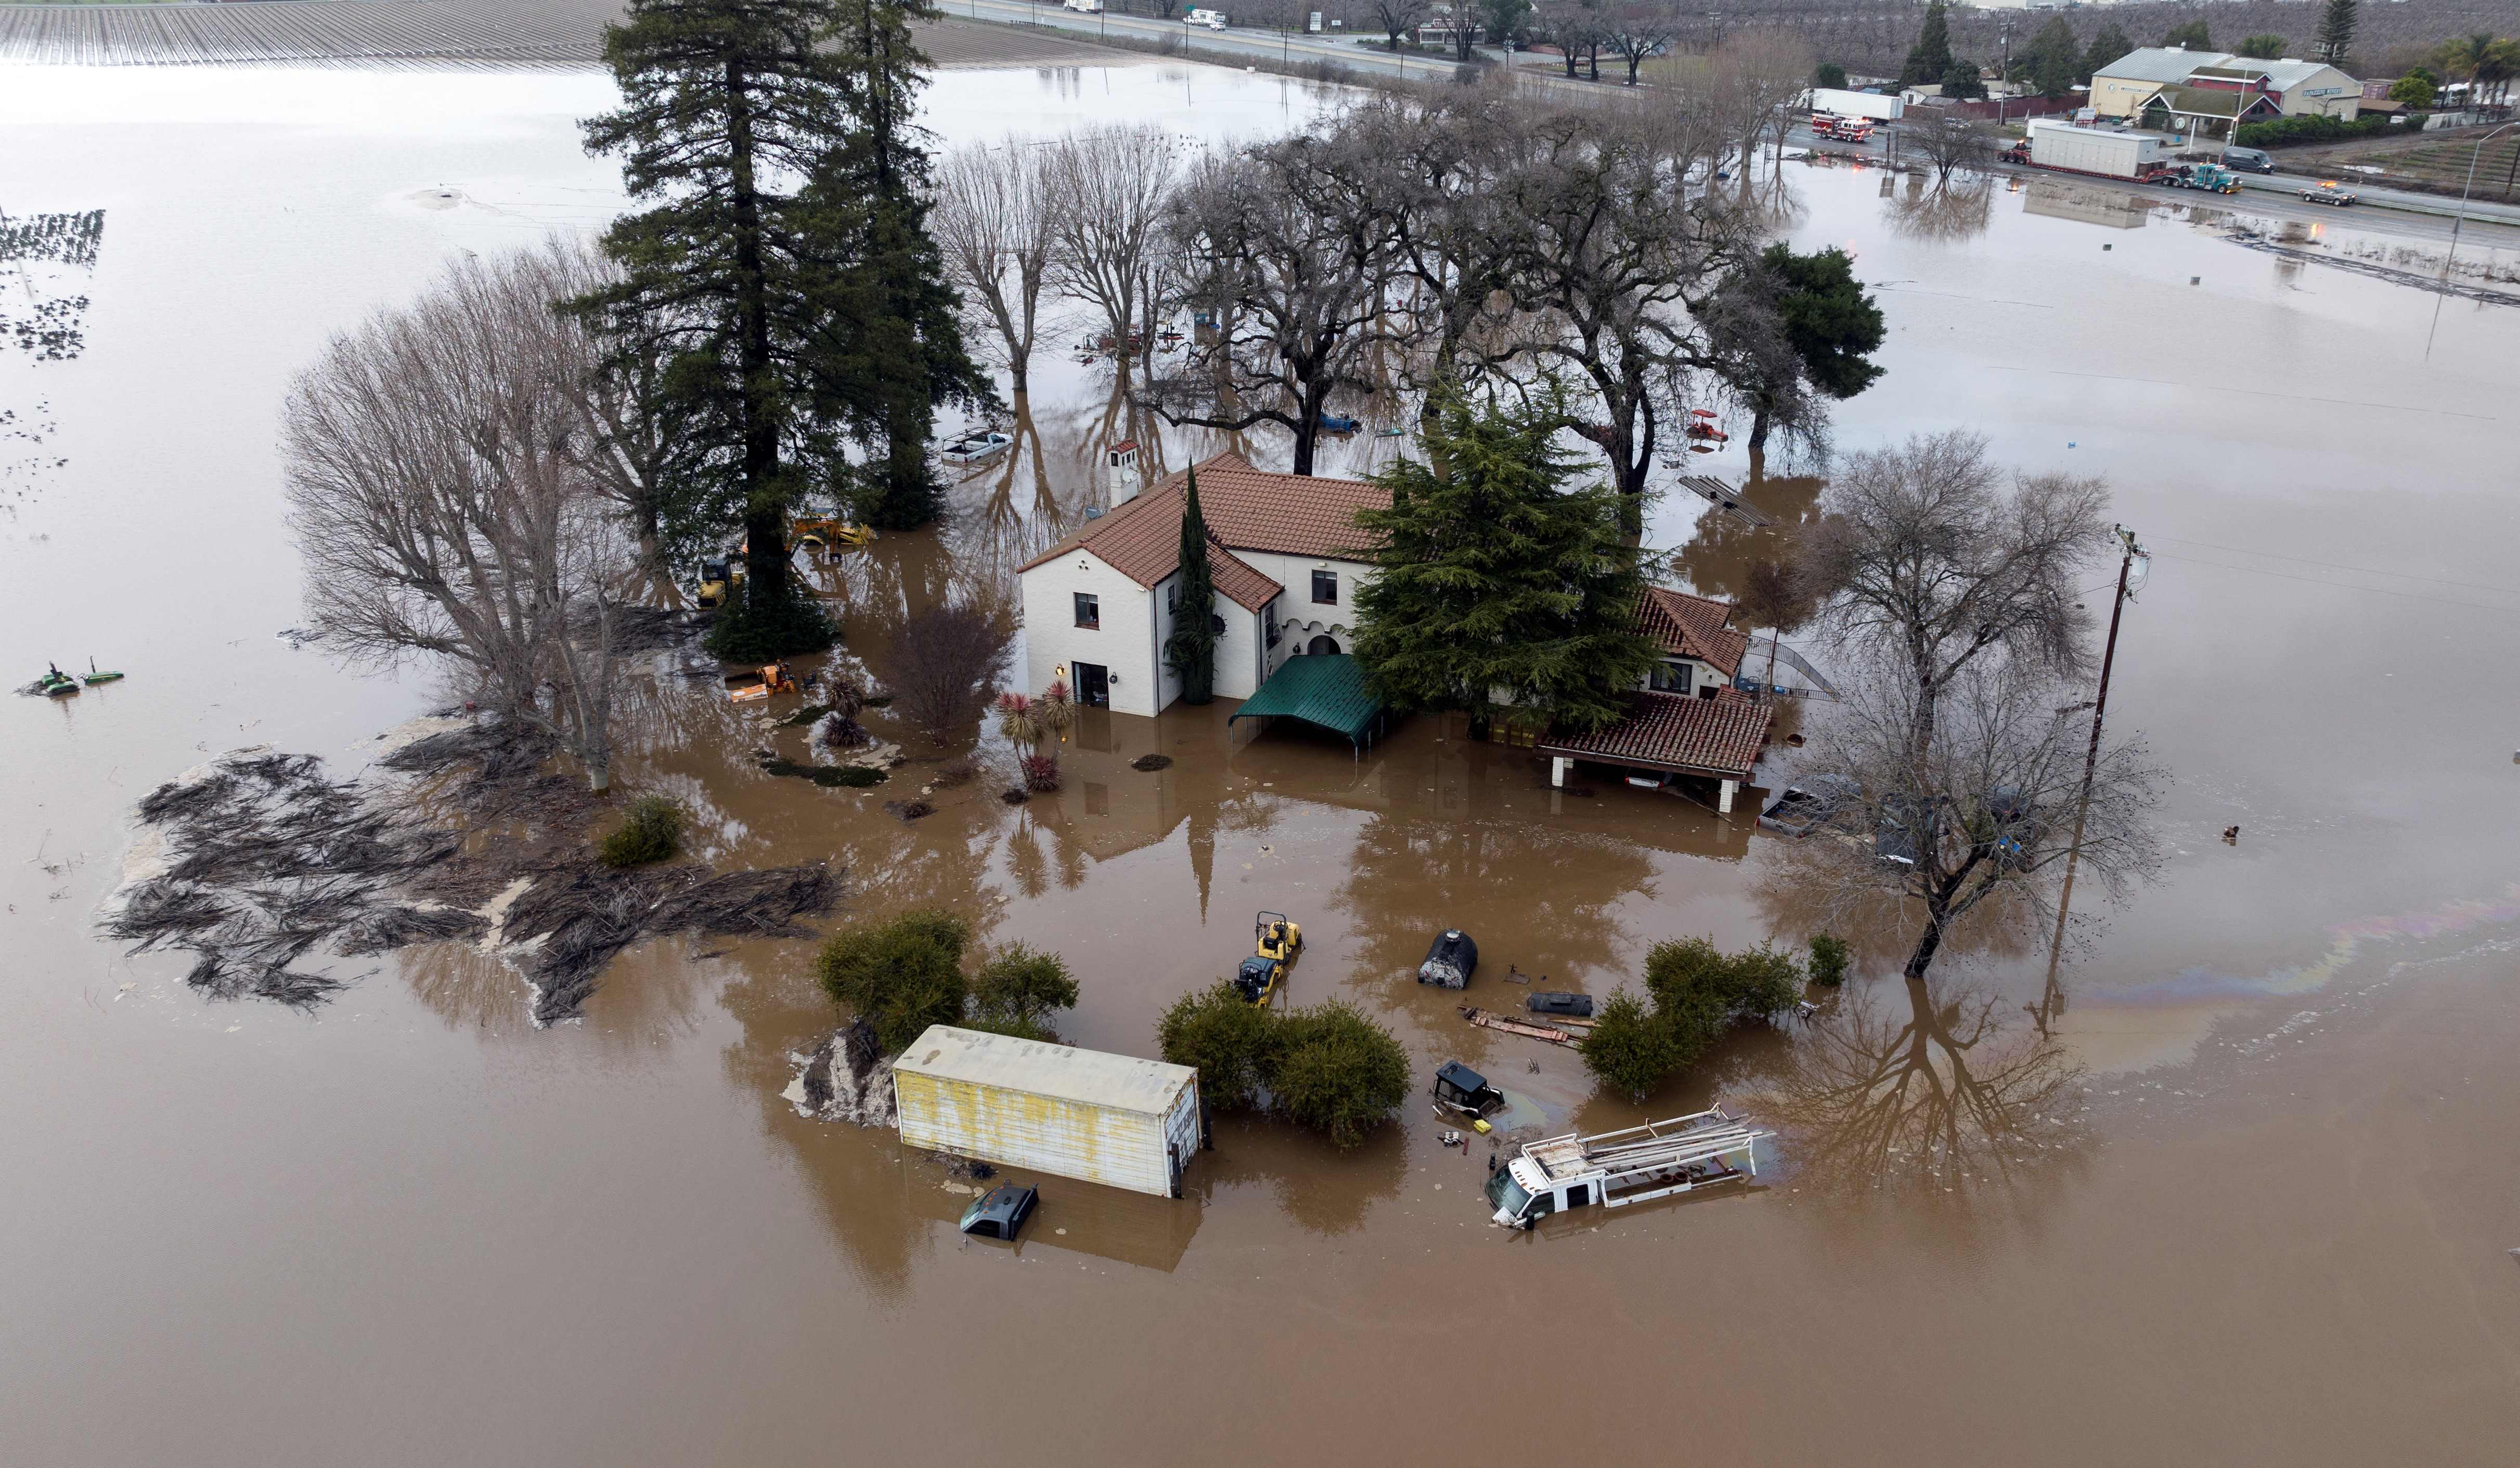 This aerial view shows a flooded home partially underwater in Gilroy, California, on January 9, 2023